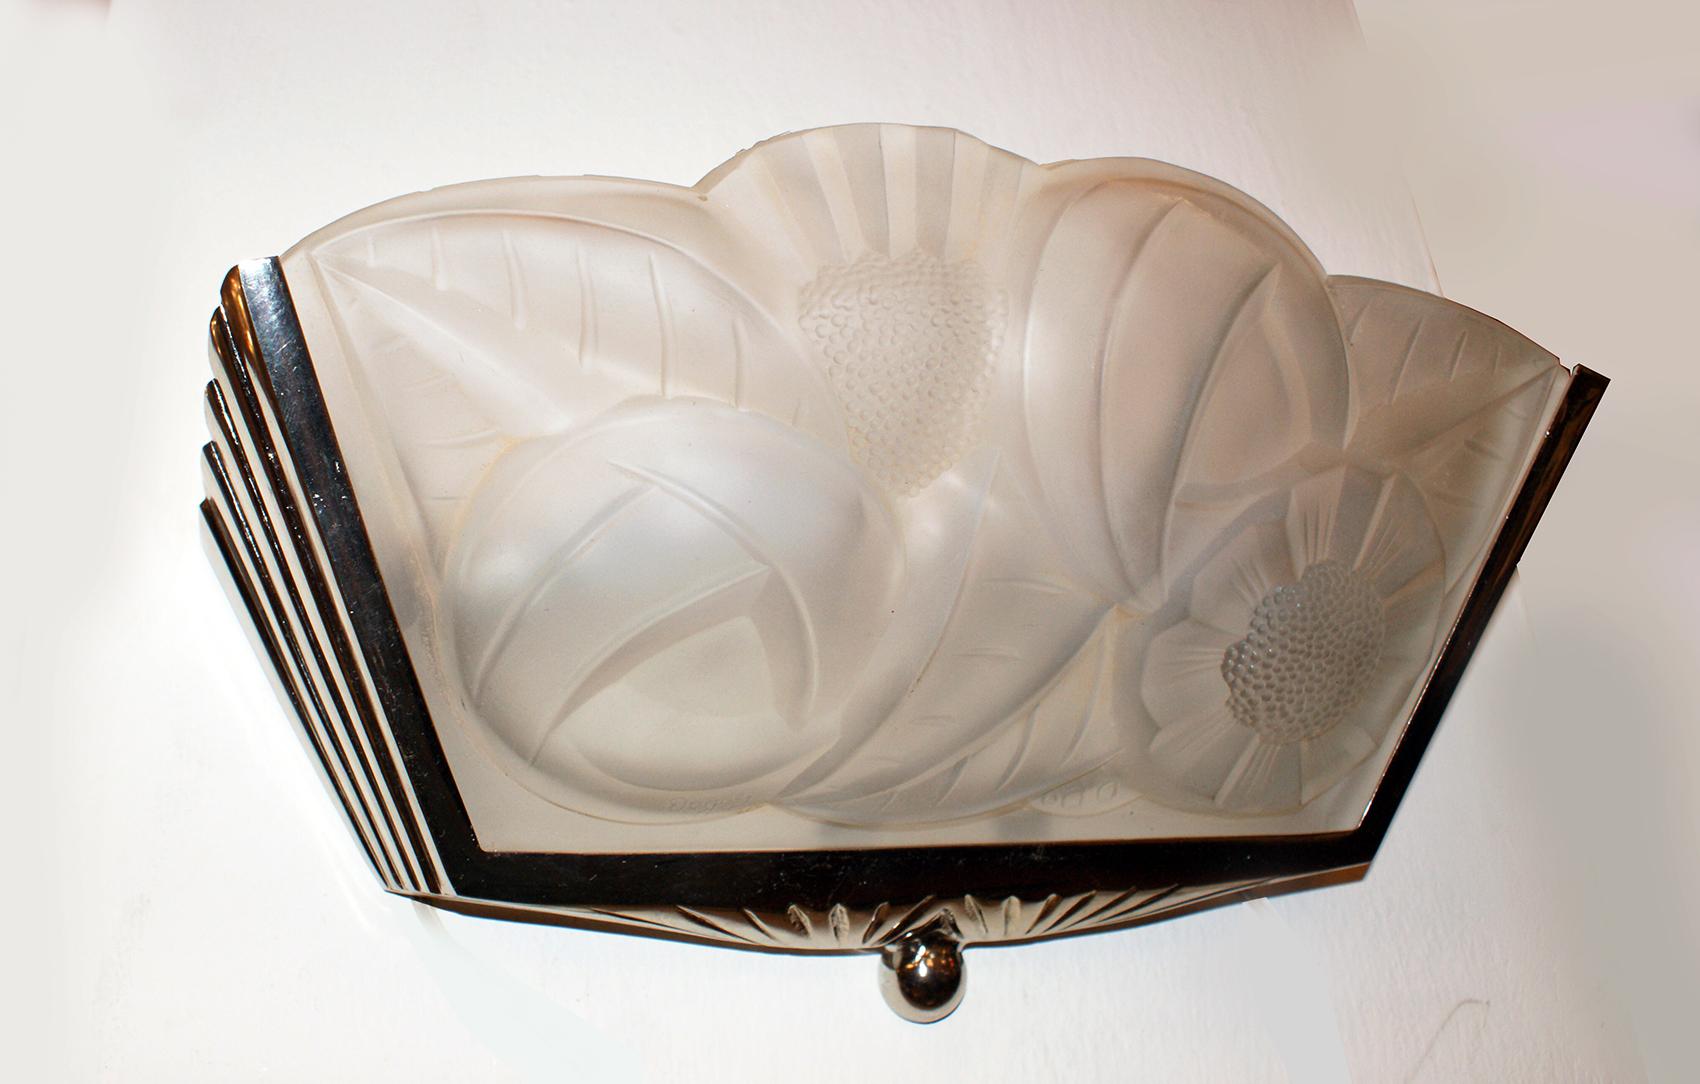 Stunning pair of French Art Deco wall scones signed by the French artist Degué (David Gueron). 
The panels are in molded clear frosted glass with floral motif design, held by a geometric nickel polished frame. 
Having two candelabra sockets in